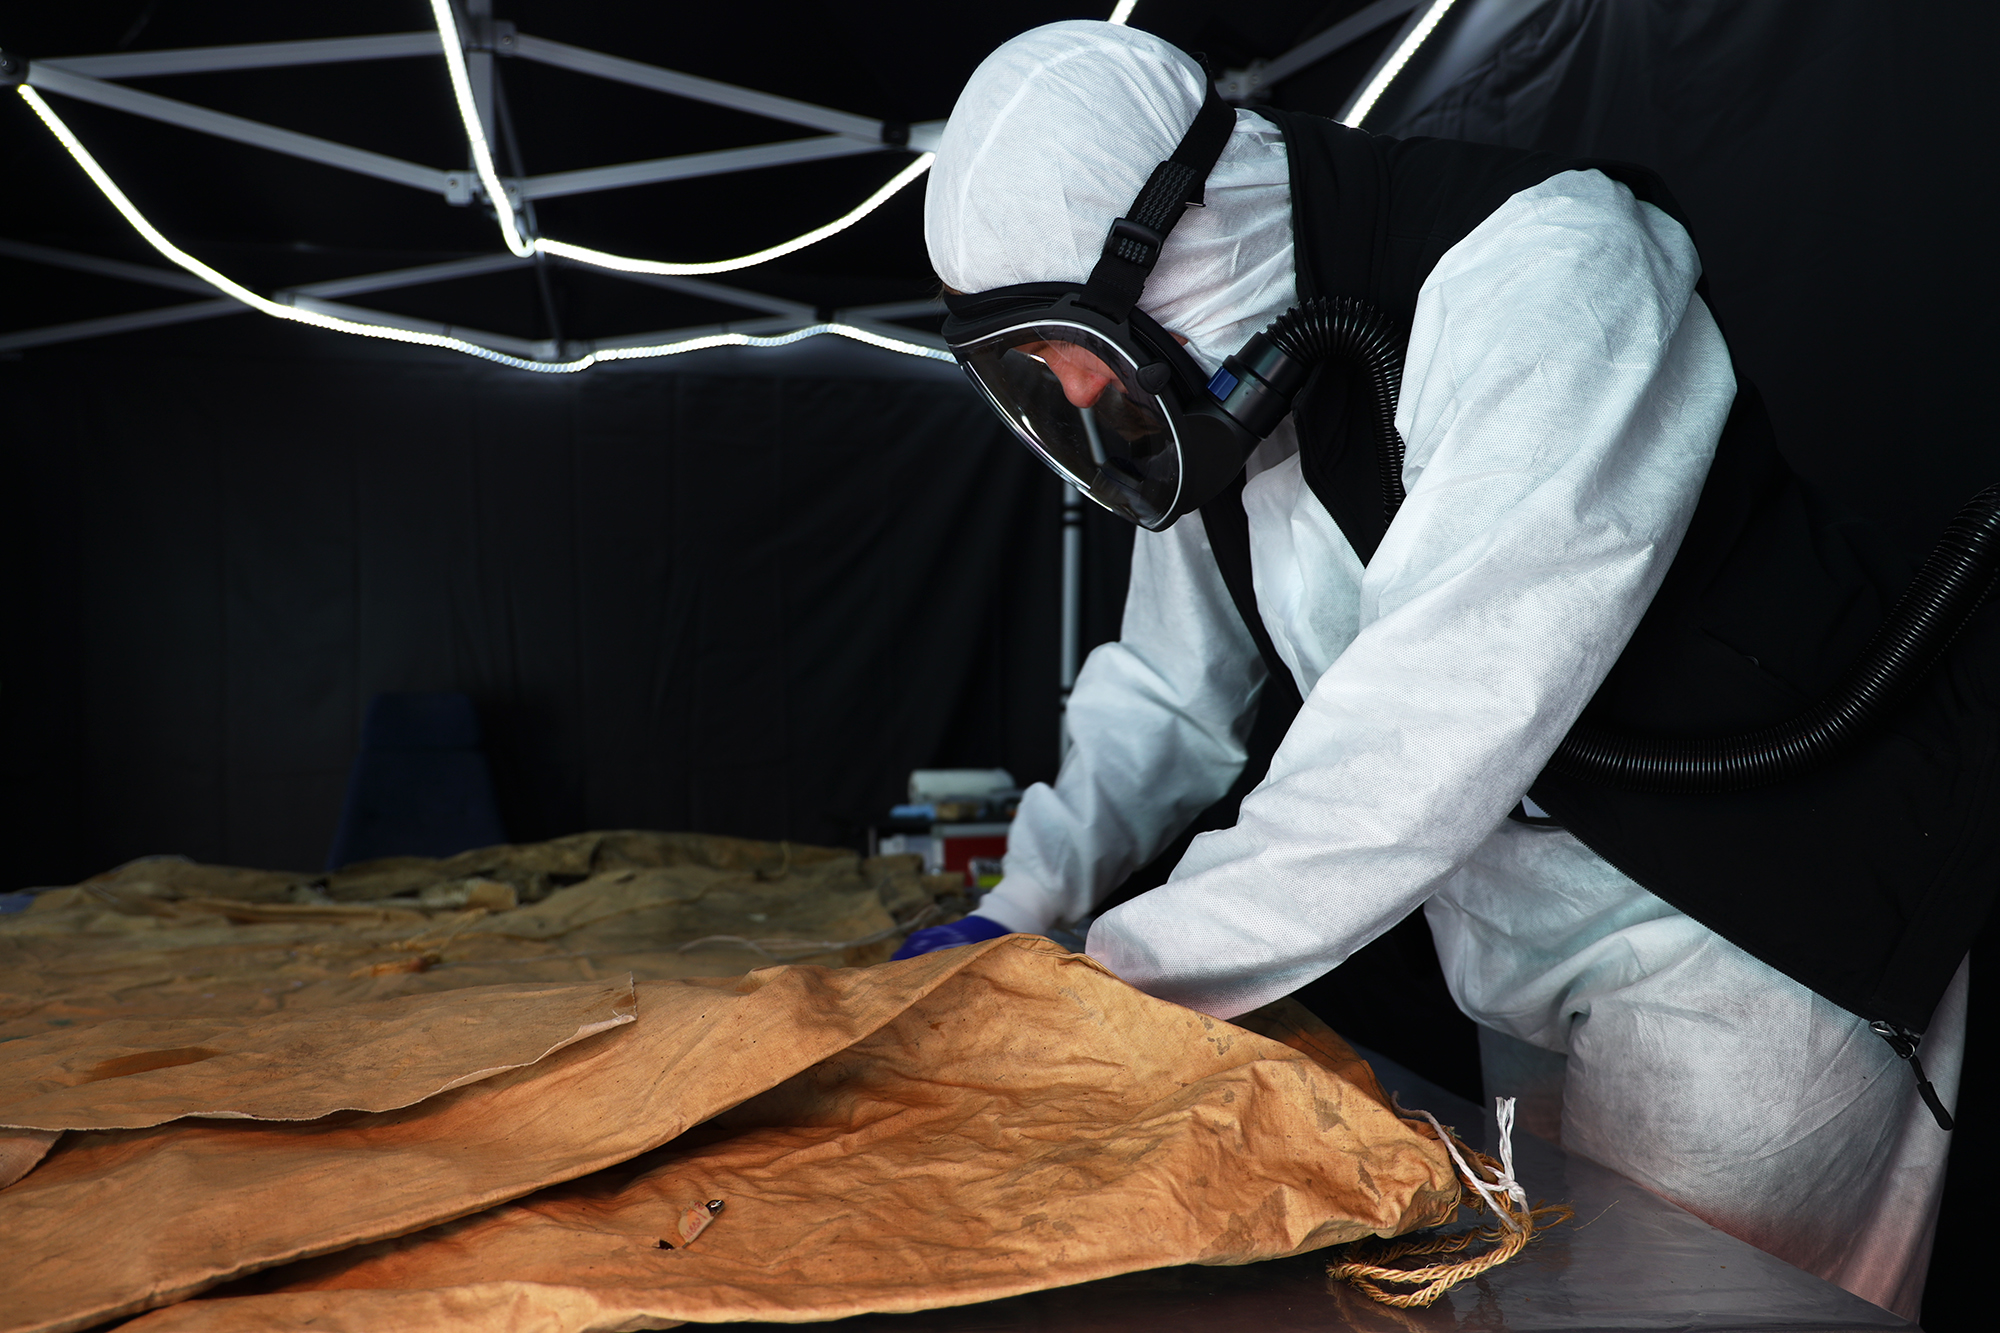 A person dressed in a white protective suit and blue gloves examines the brown tent cloth on the table. The person has a respirator on their face.